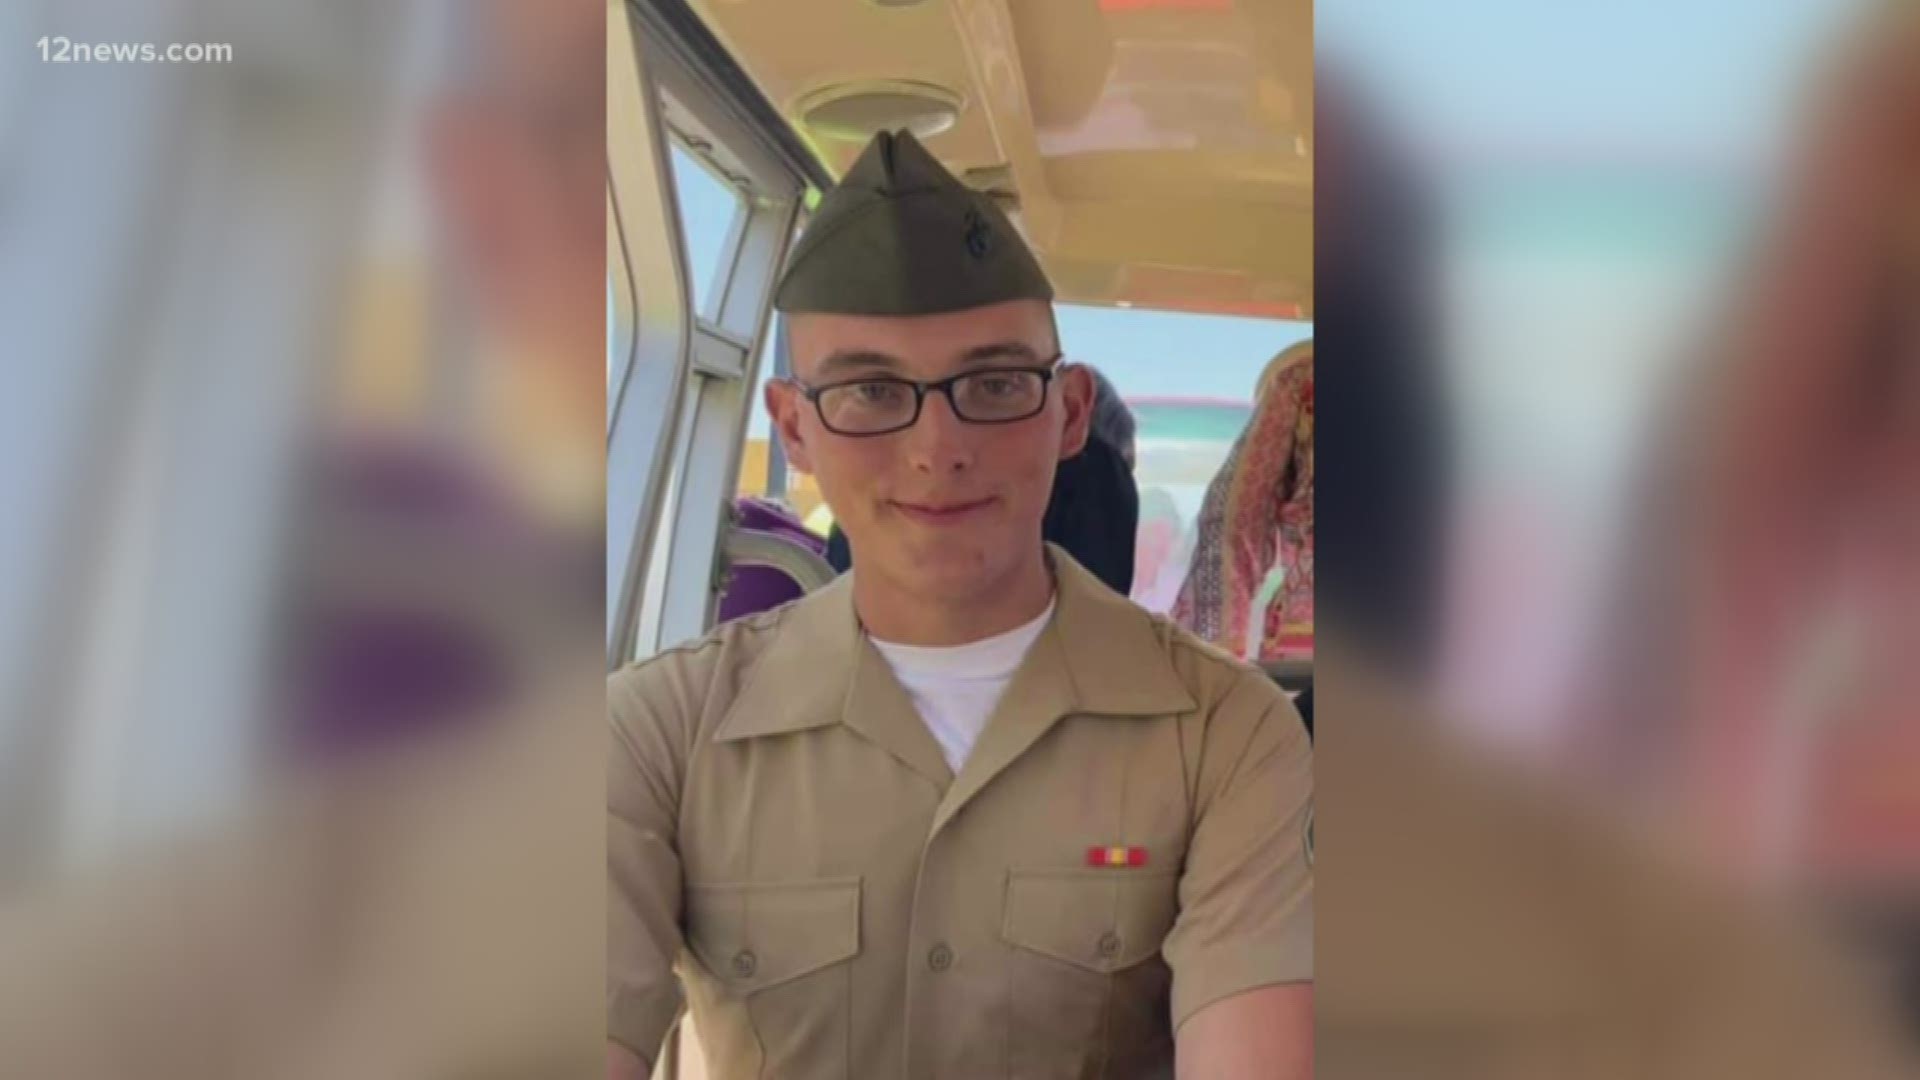 A Valley family is desperately trying to find their son, who never showed for service at Camp Pendleton on Tuesday. Team 12's Colleen Sikora has the latest.